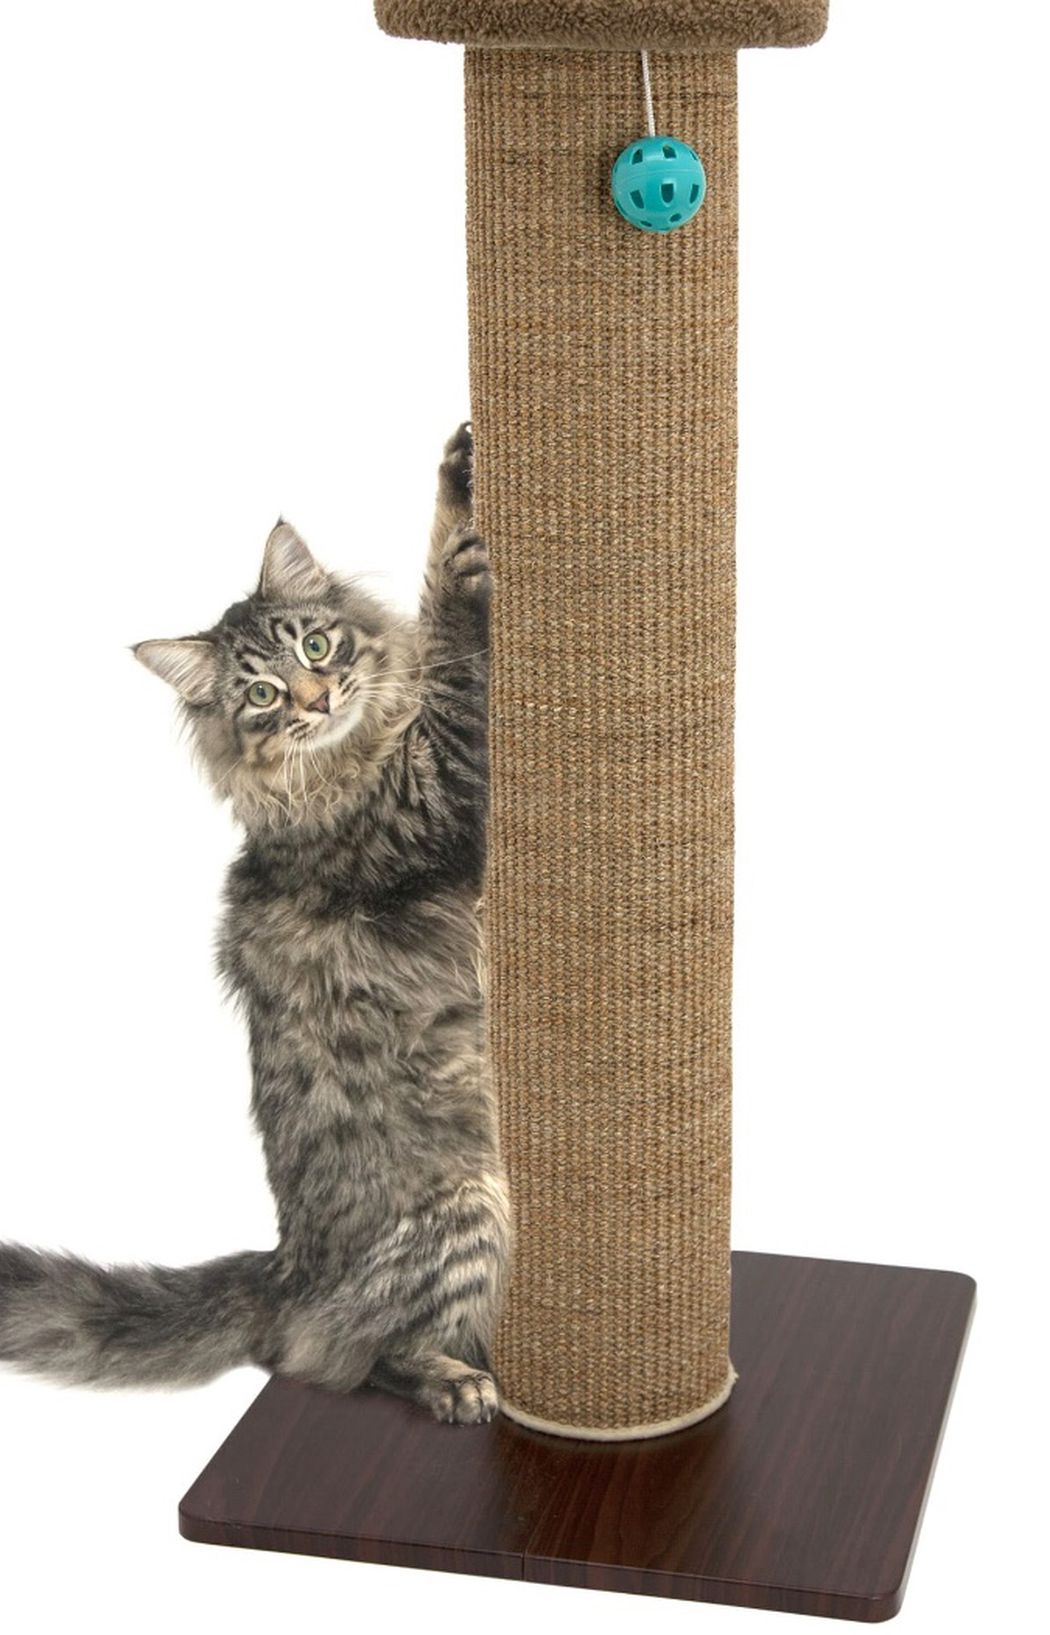 Kitty City Scratching Post 30$ Each OBO Deal Original Price 50$